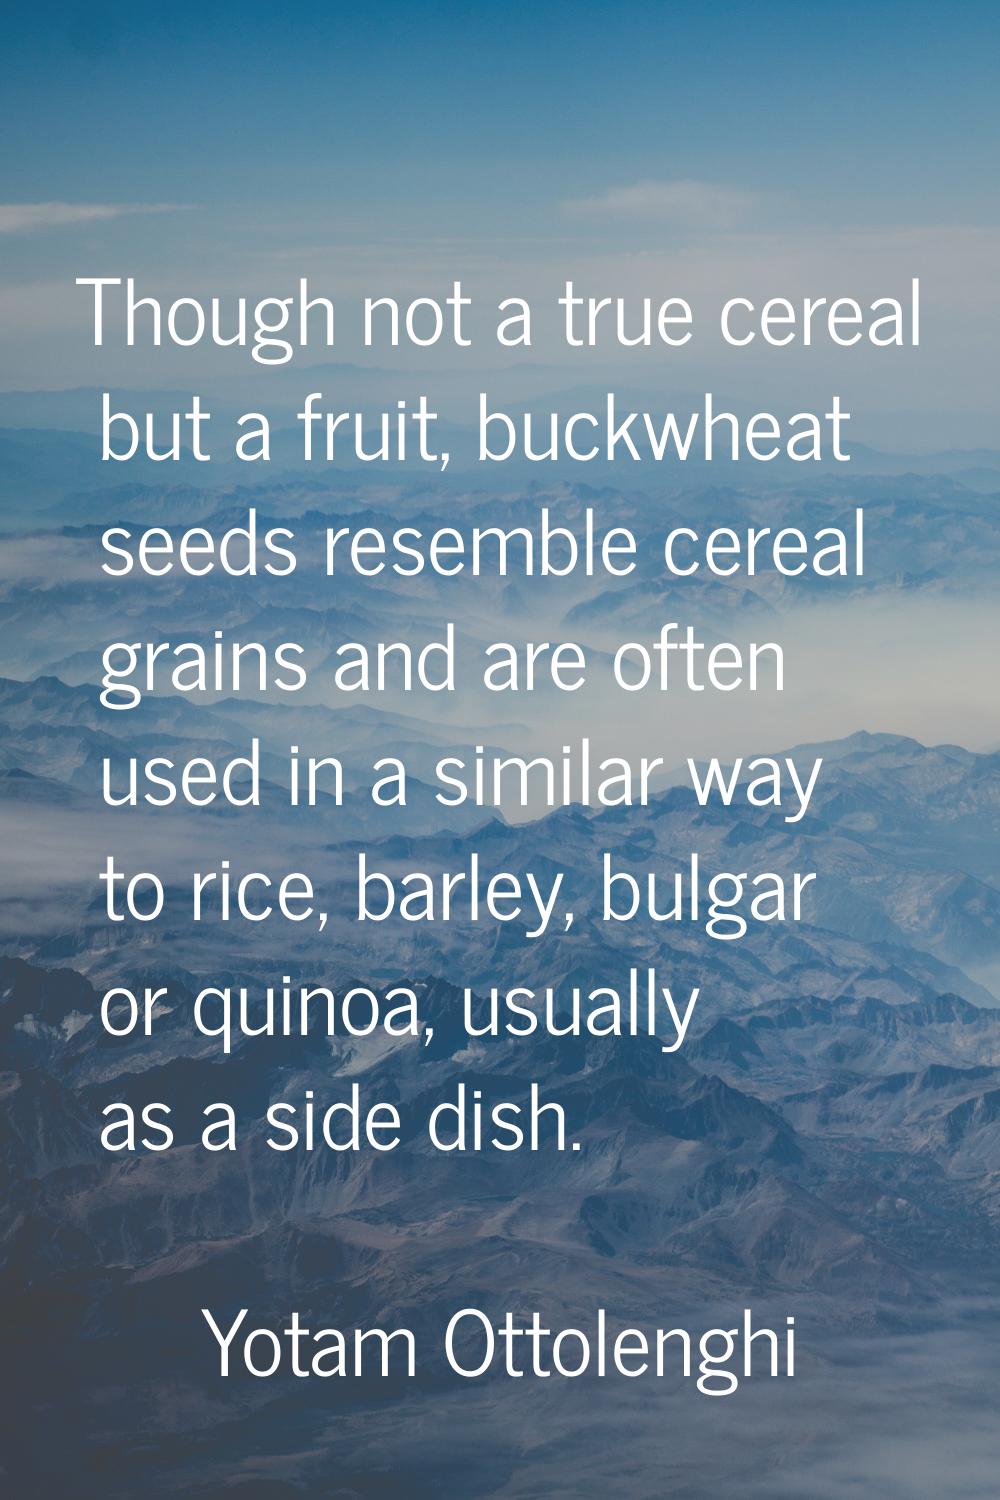 Though not a true cereal but a fruit, buckwheat seeds resemble cereal grains and are often used in 